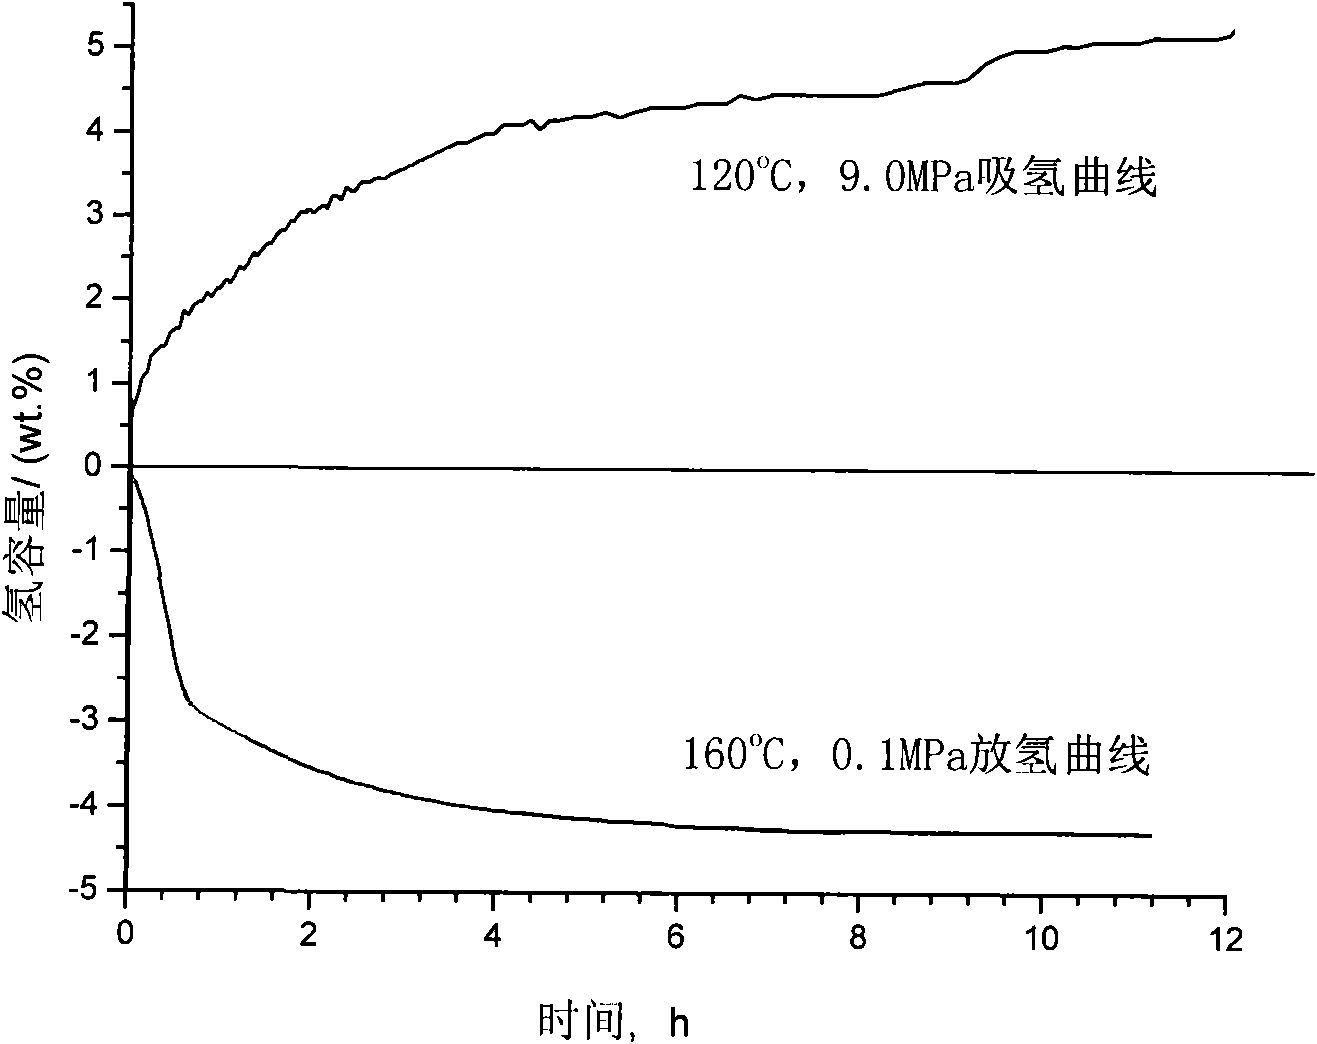 NaAlH* compound hydrogen storage material catalyzed by Ce hydride and preparation method thereof